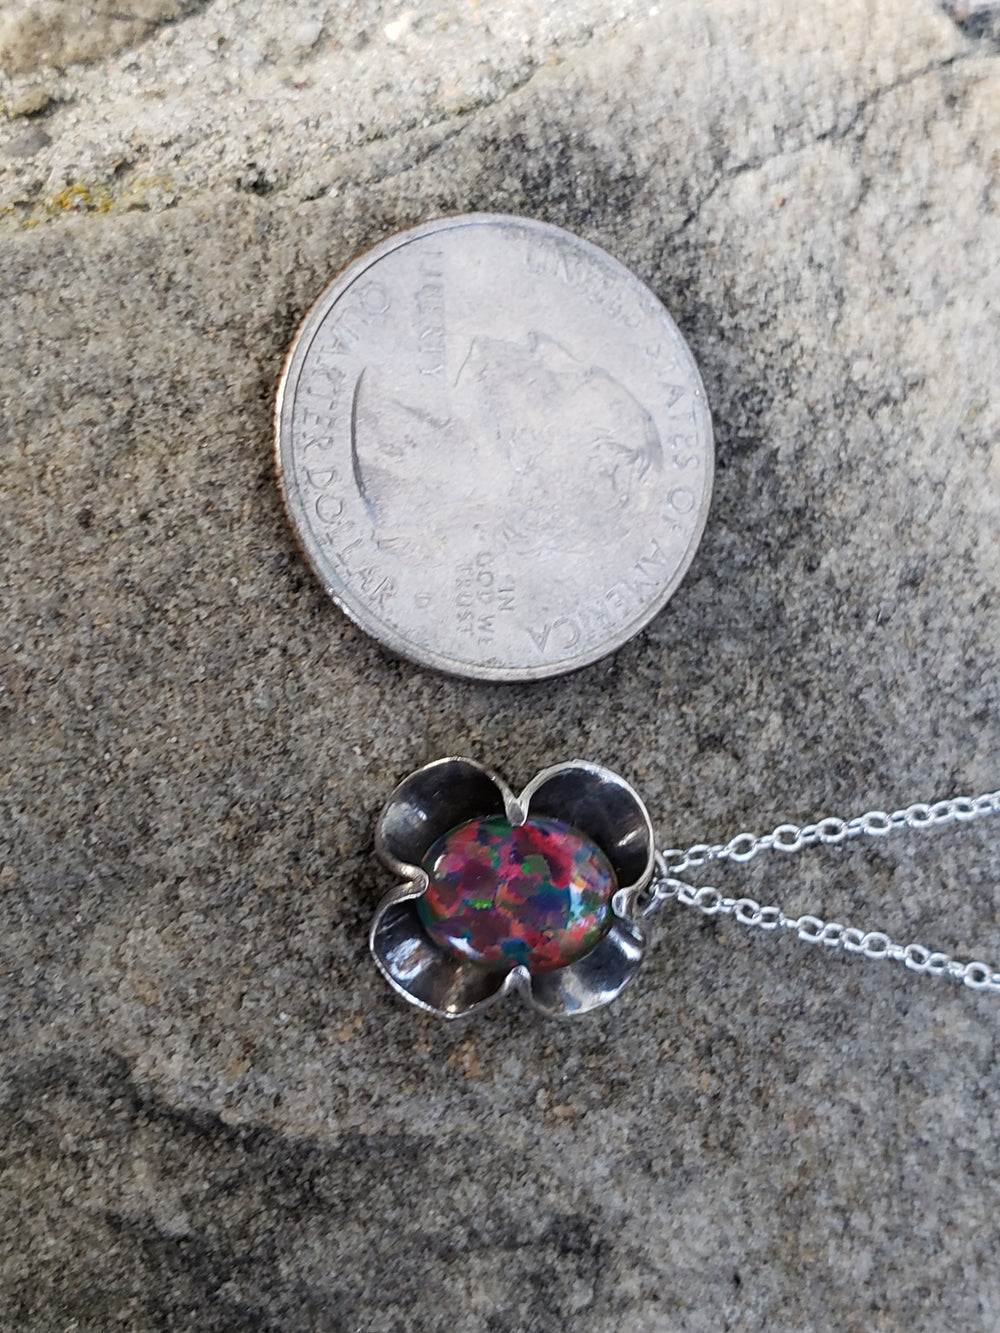 Opal Triplet in Buttercup Setting / Silver and Opal Necklace / Black Opal Triplet / Black Opal Triplet Pendant / October Birthstone Pendant